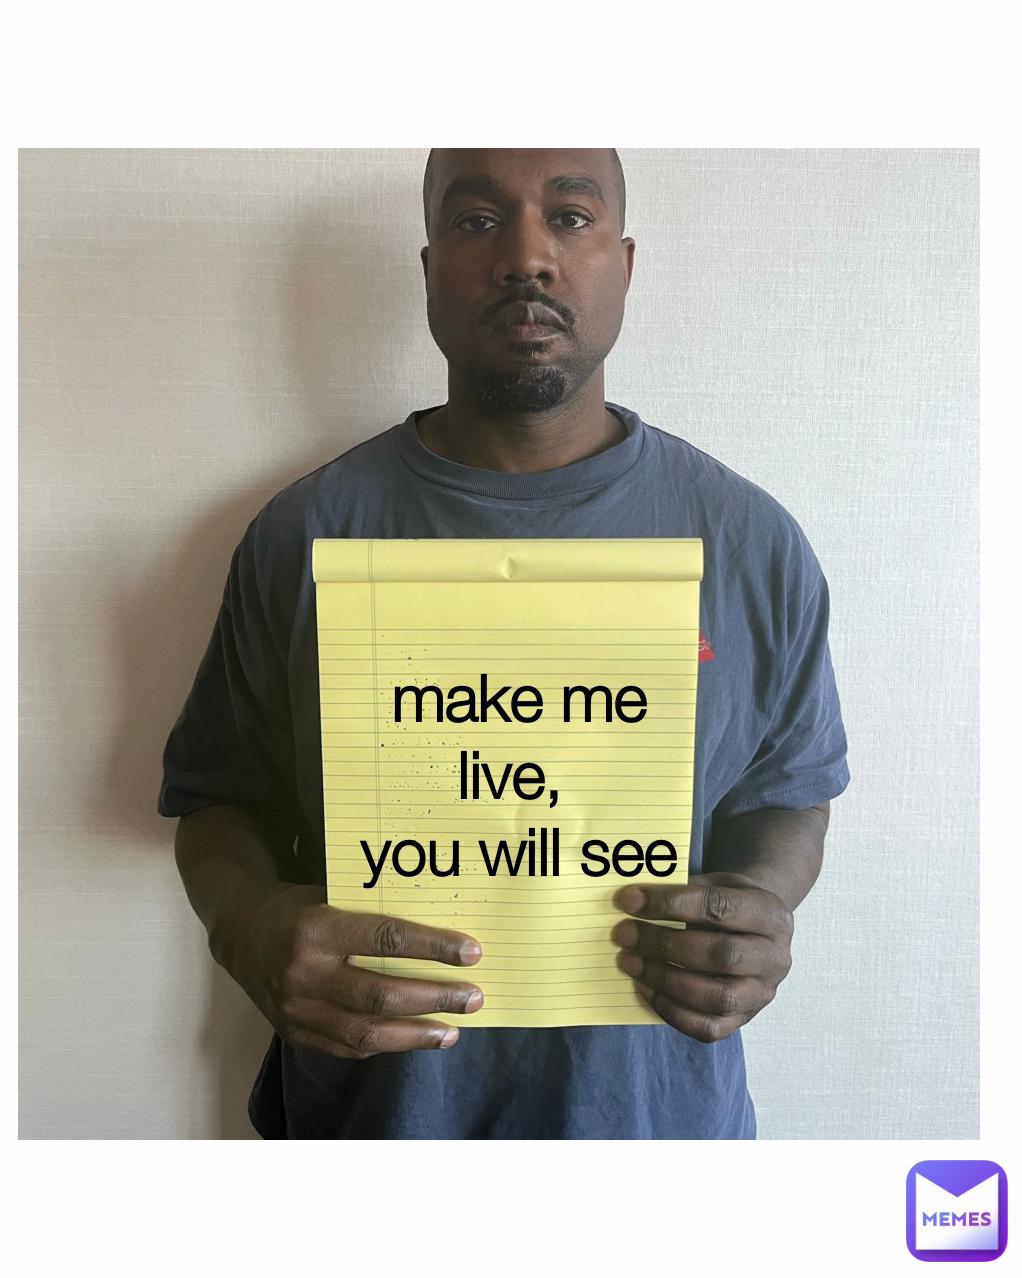 make me live, 
you will see